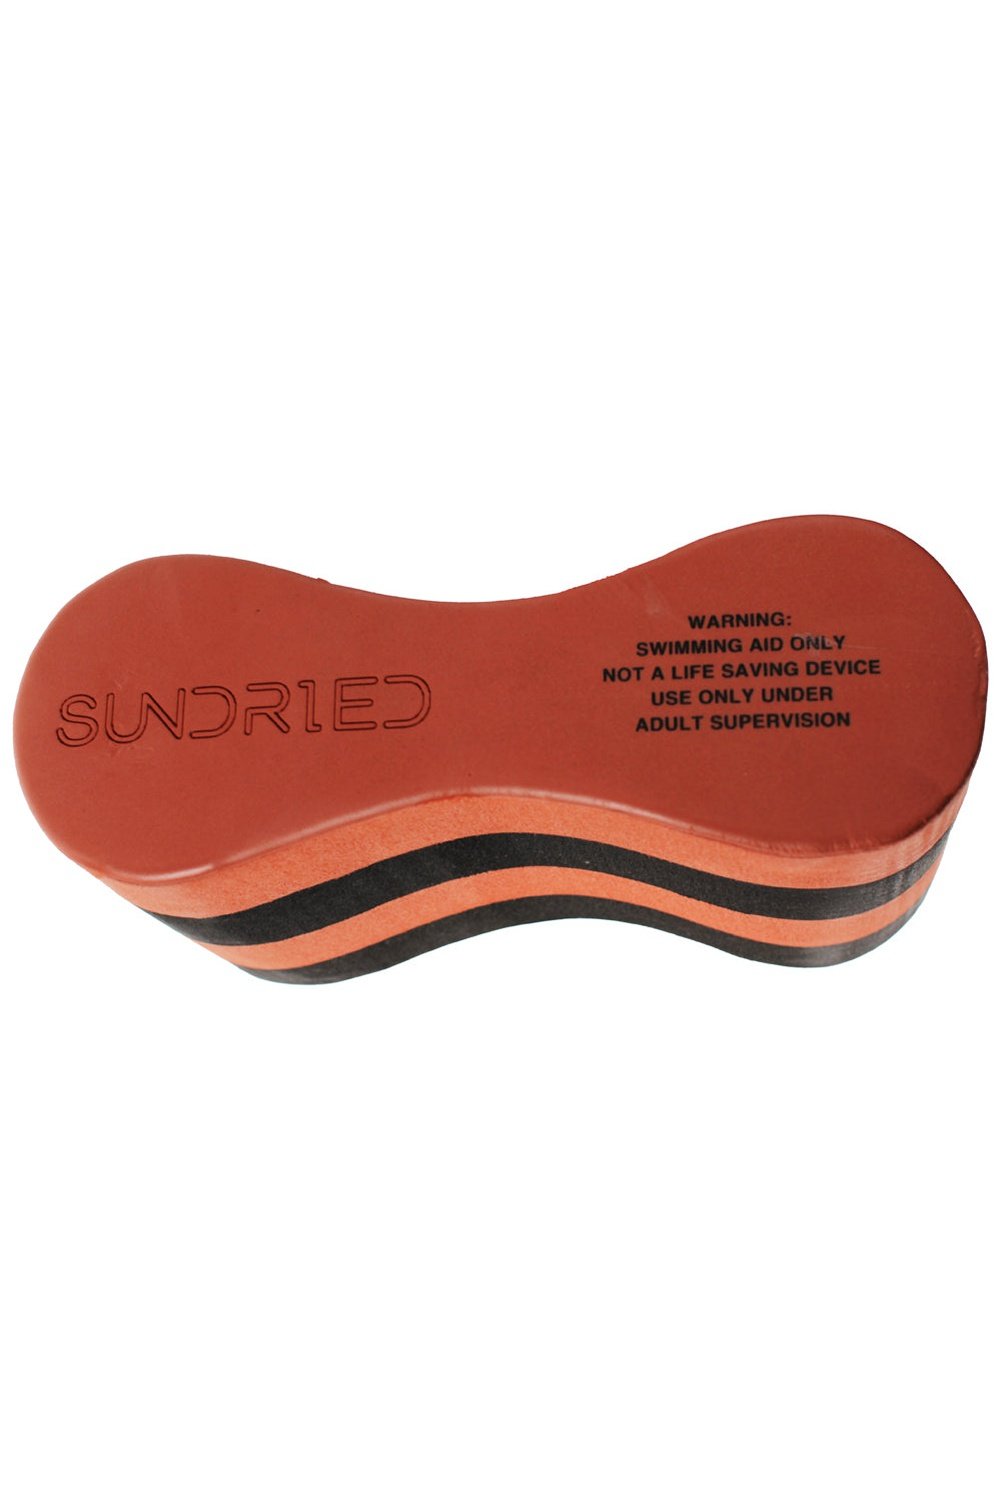 Sundried Pullbuoy Float Accessories SD0348 Activewear